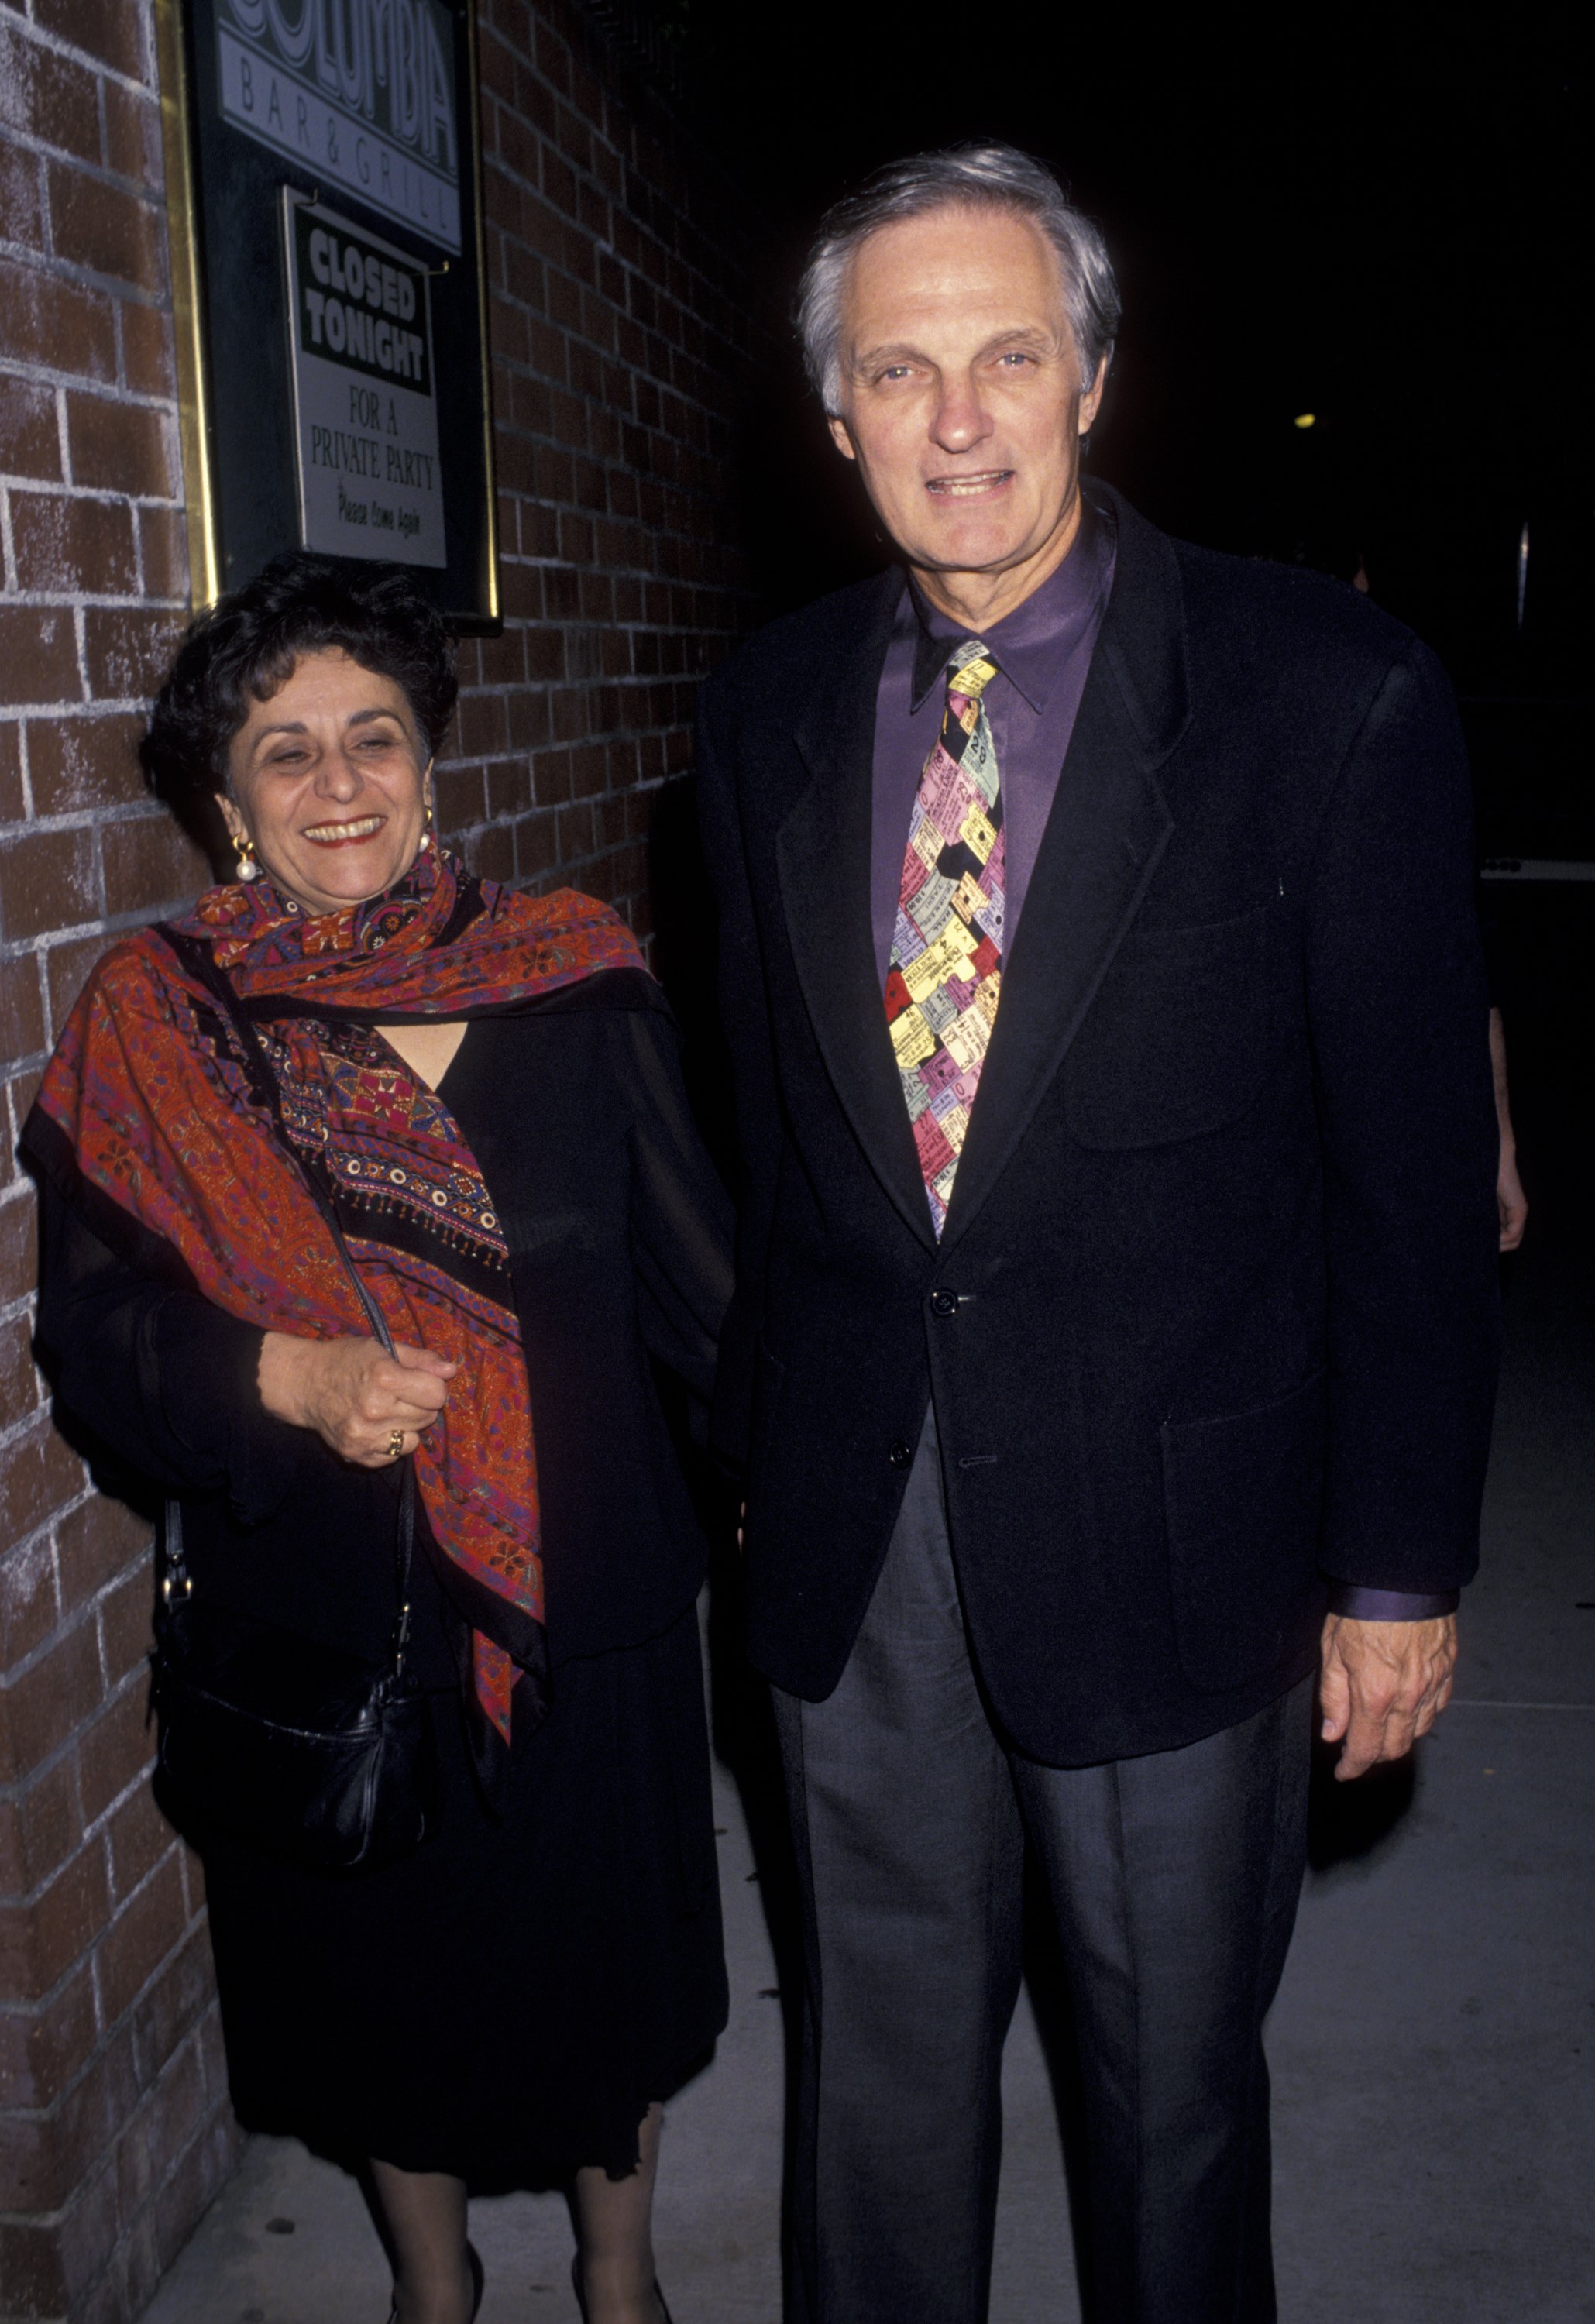 Alan Alda and Arlene Weiss attend the opening party for "Jake's Women" on April 15, 1993 at Cinegrill Restaurant in Hollywood, California | Source: Getty Images